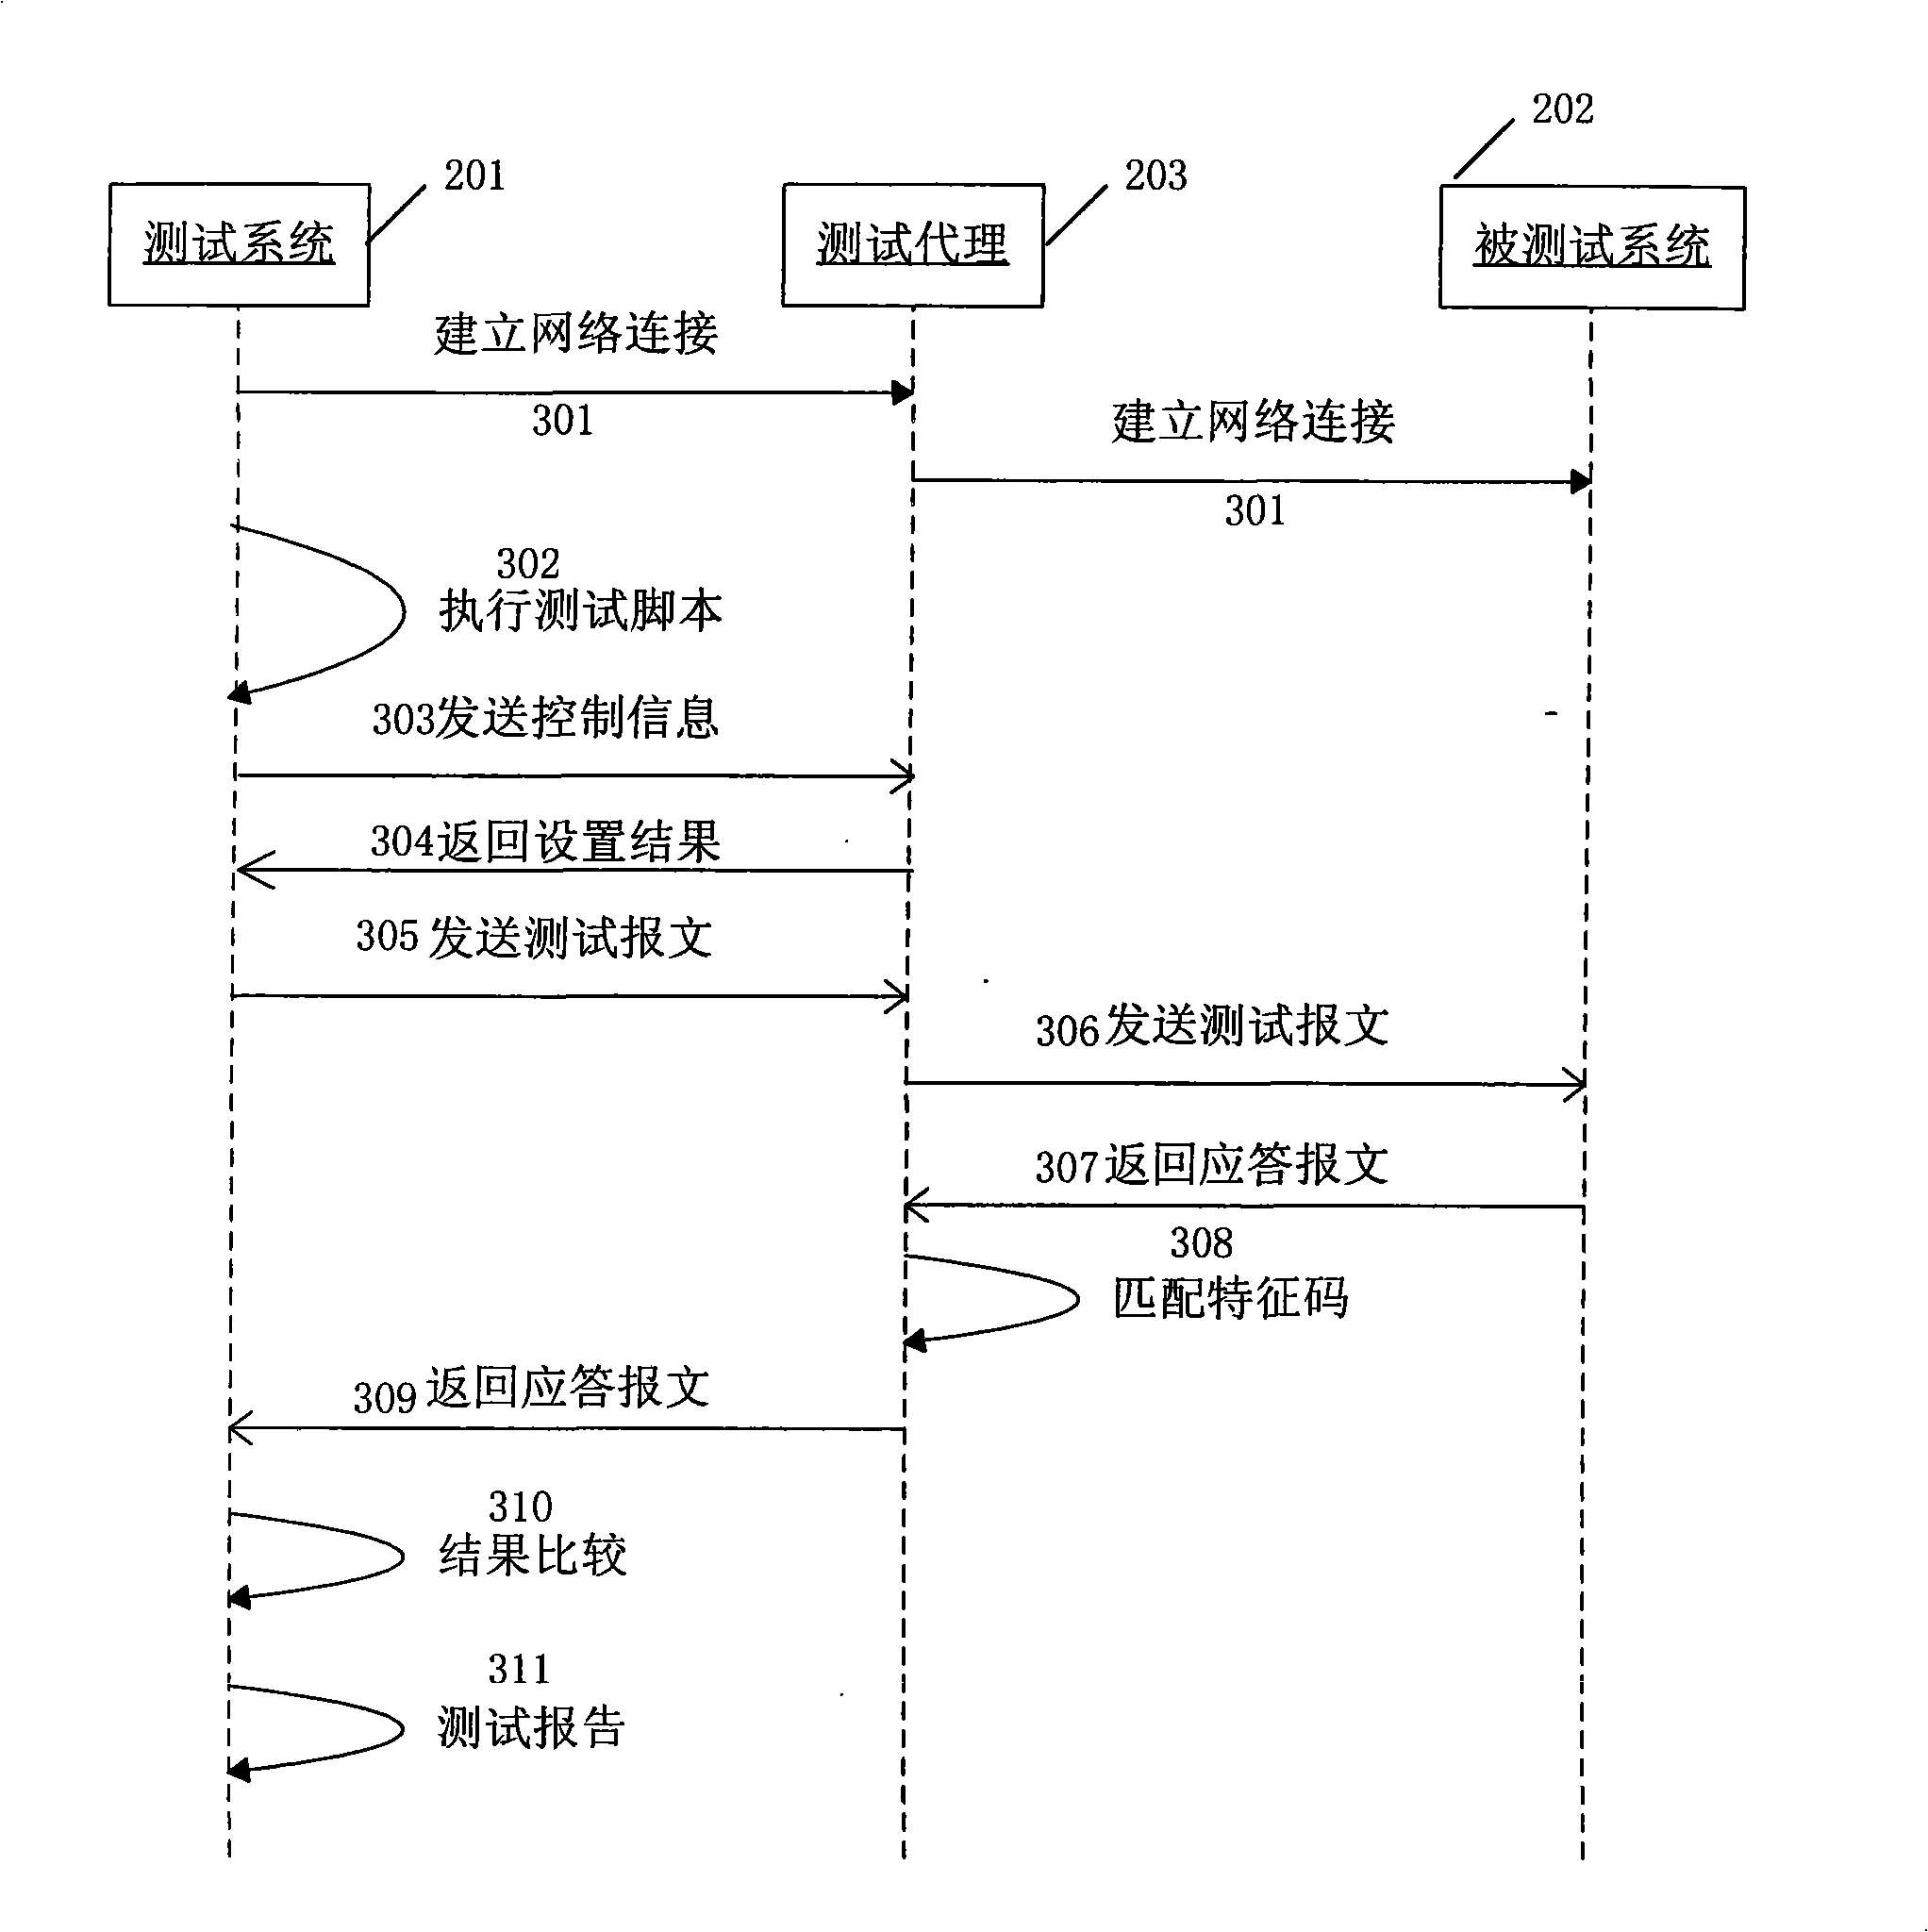 Message-driven automation test system and implementing method